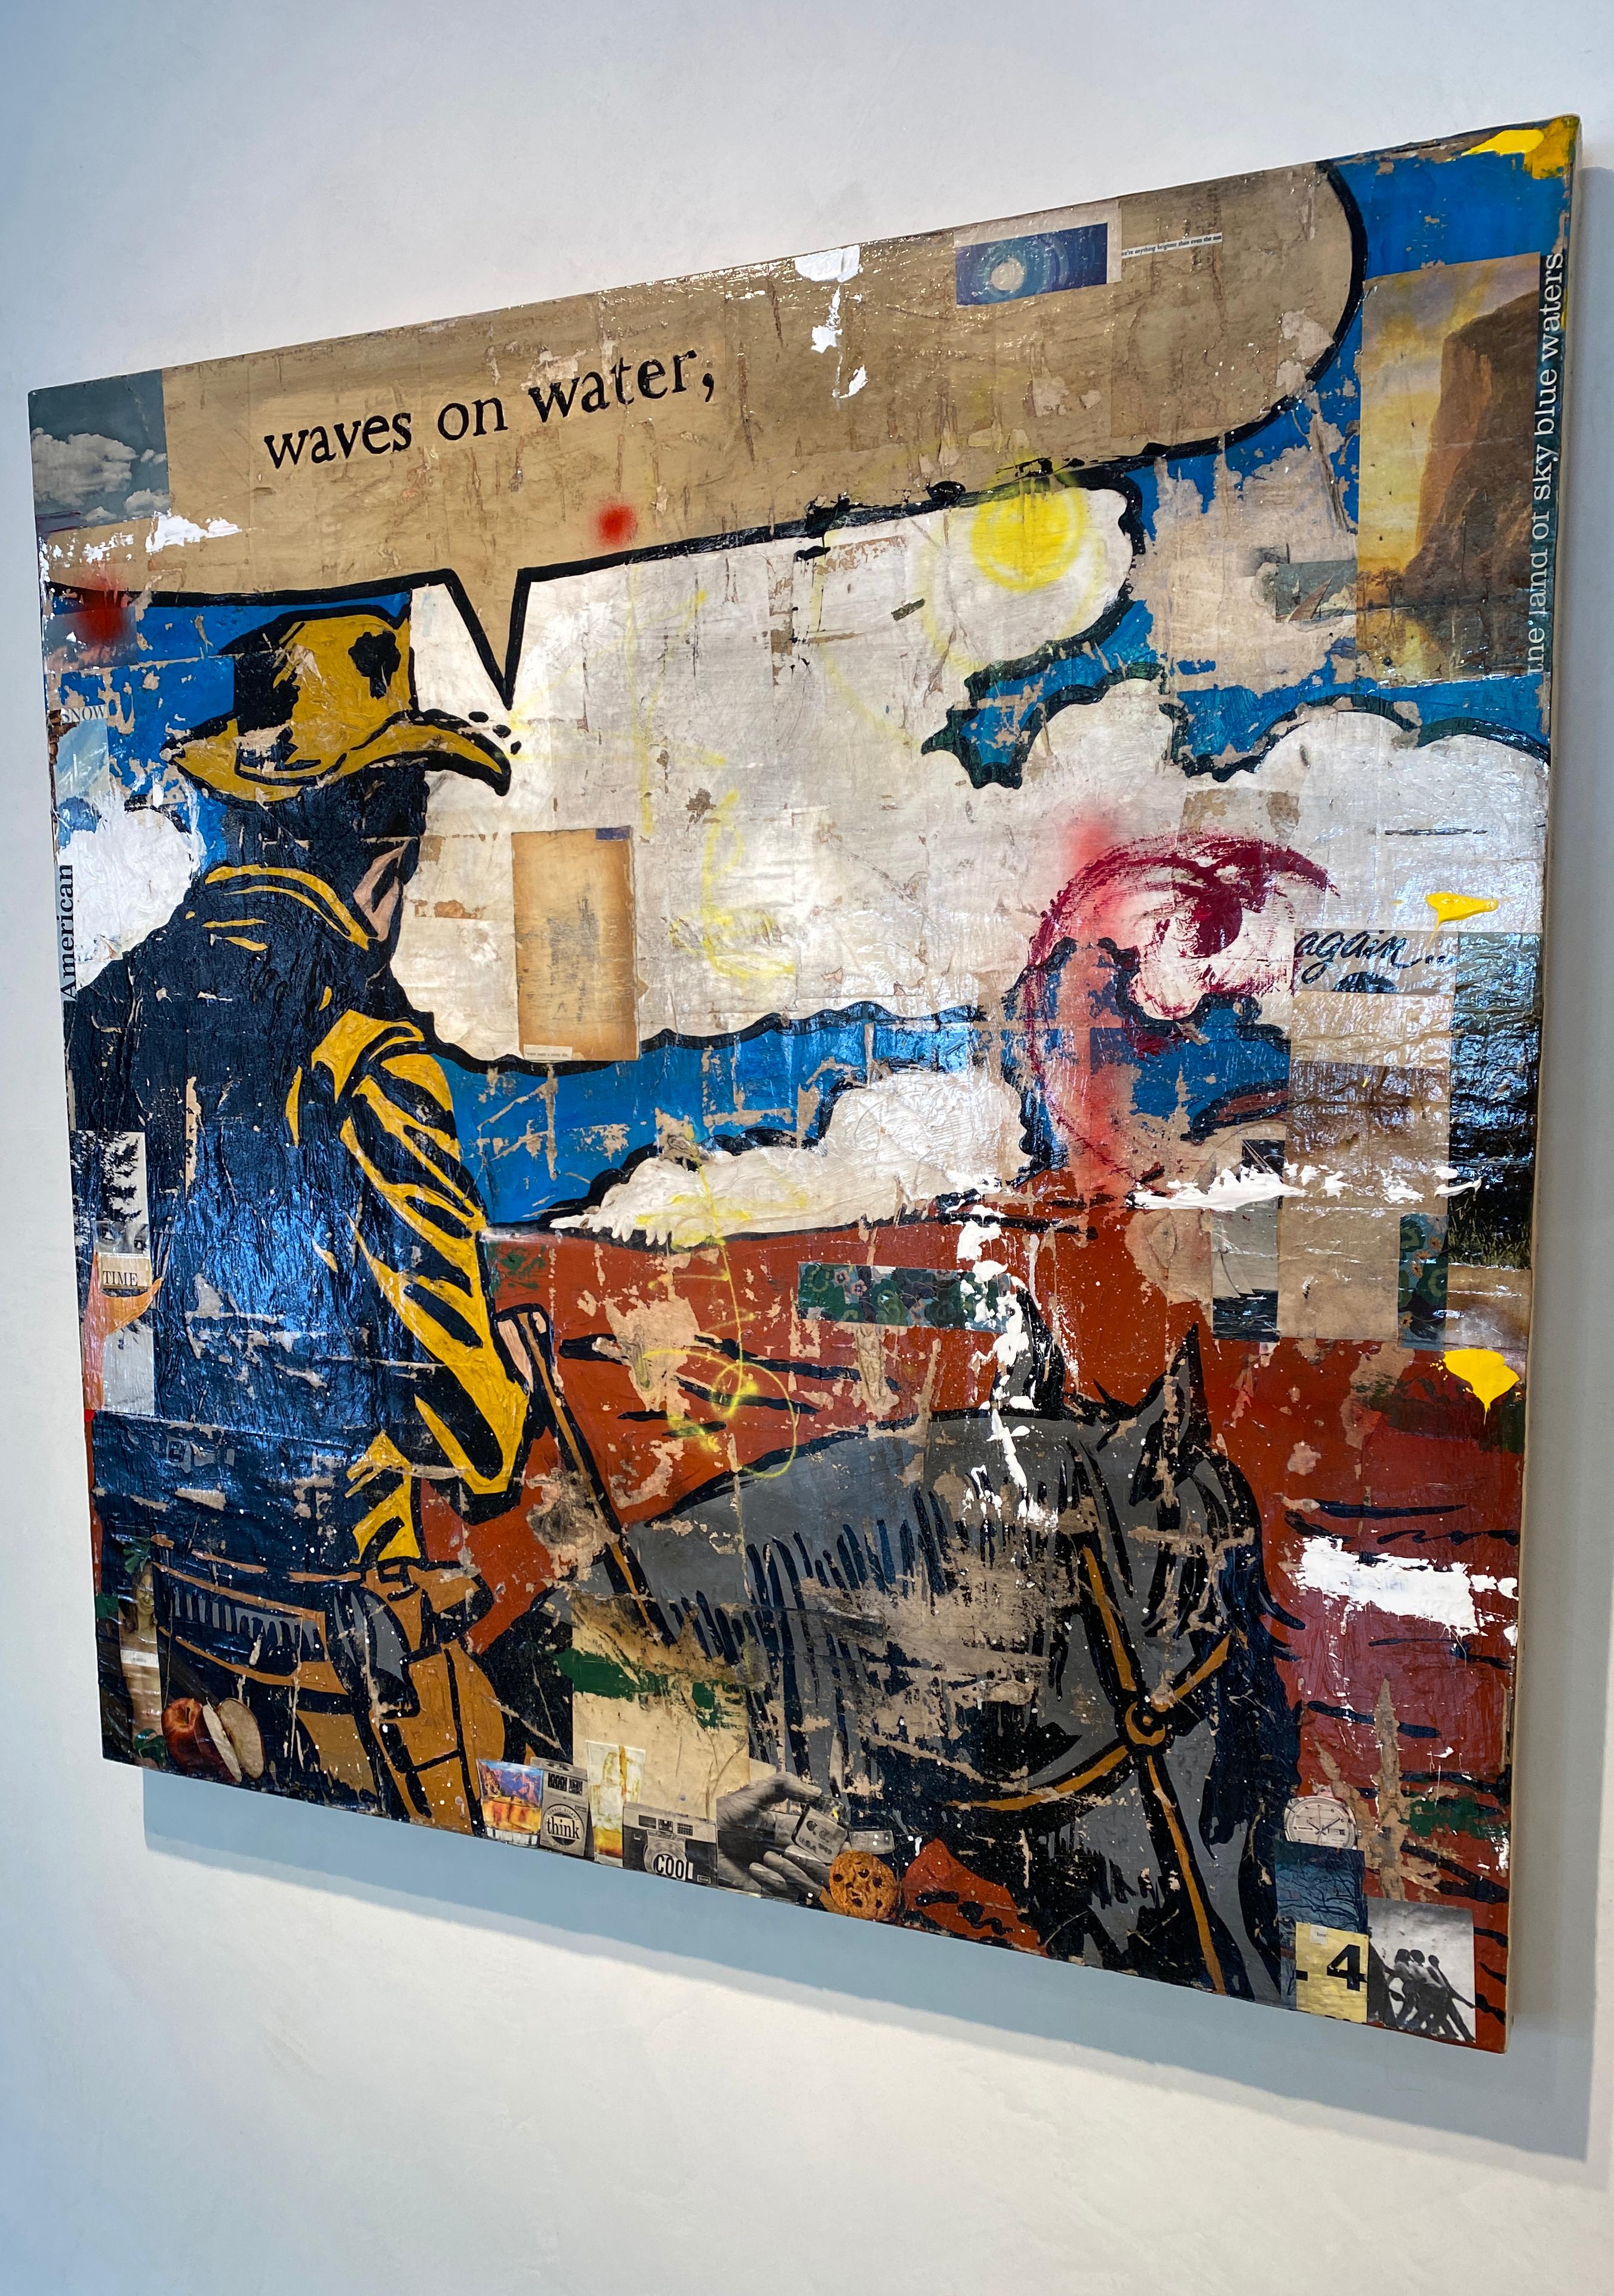 Waves on Water- western themed mixed media on panel by Greg Miller 2